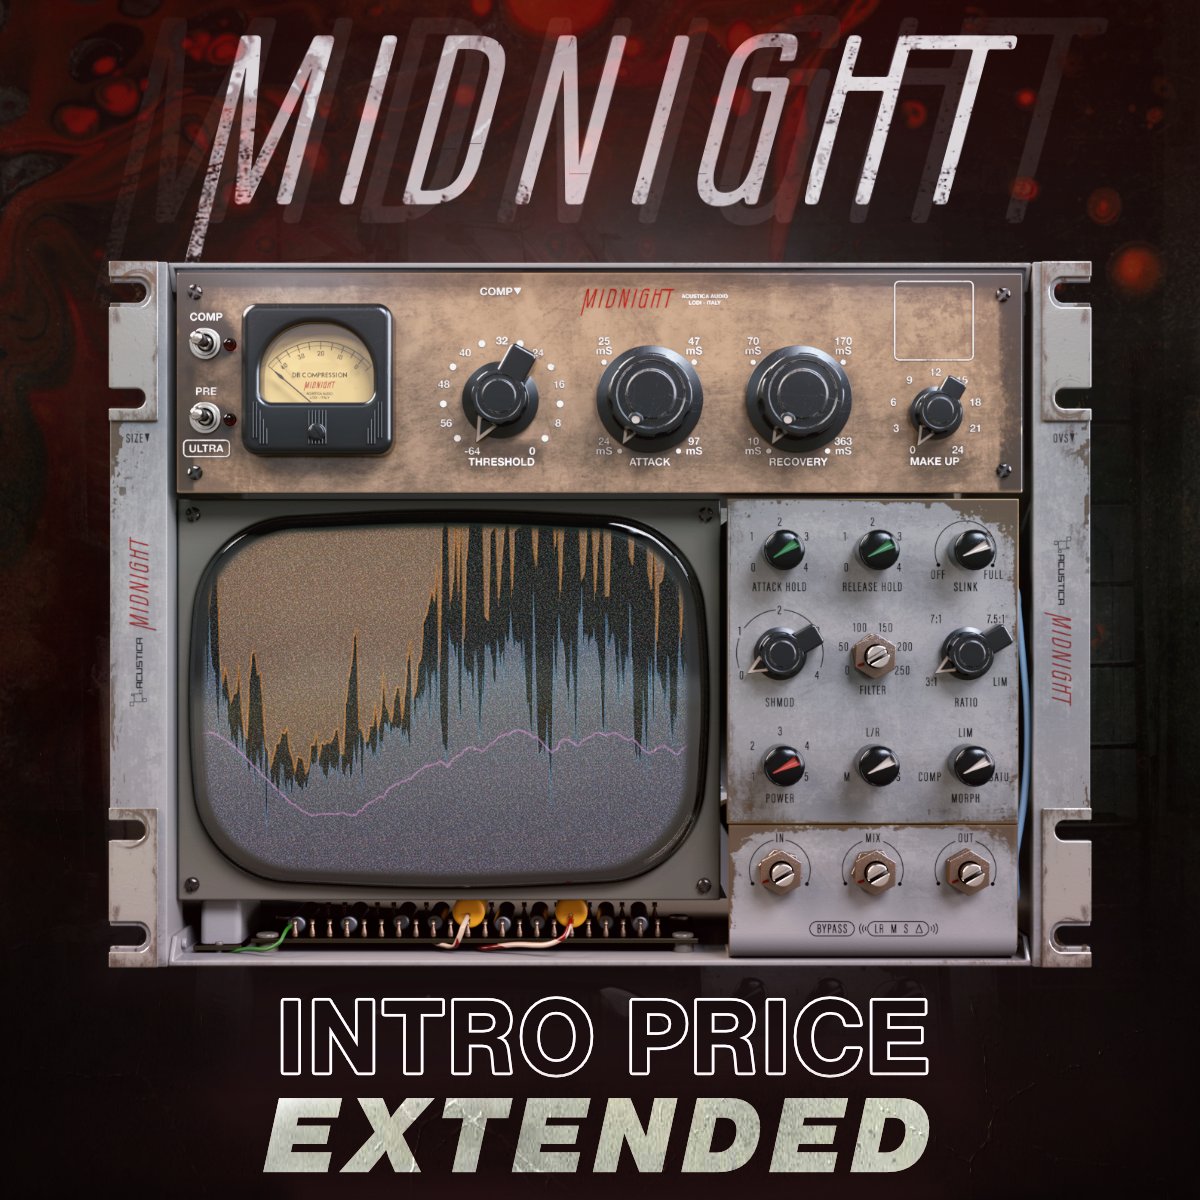 Acustica Audio on X: Last chance to seize the extended intro